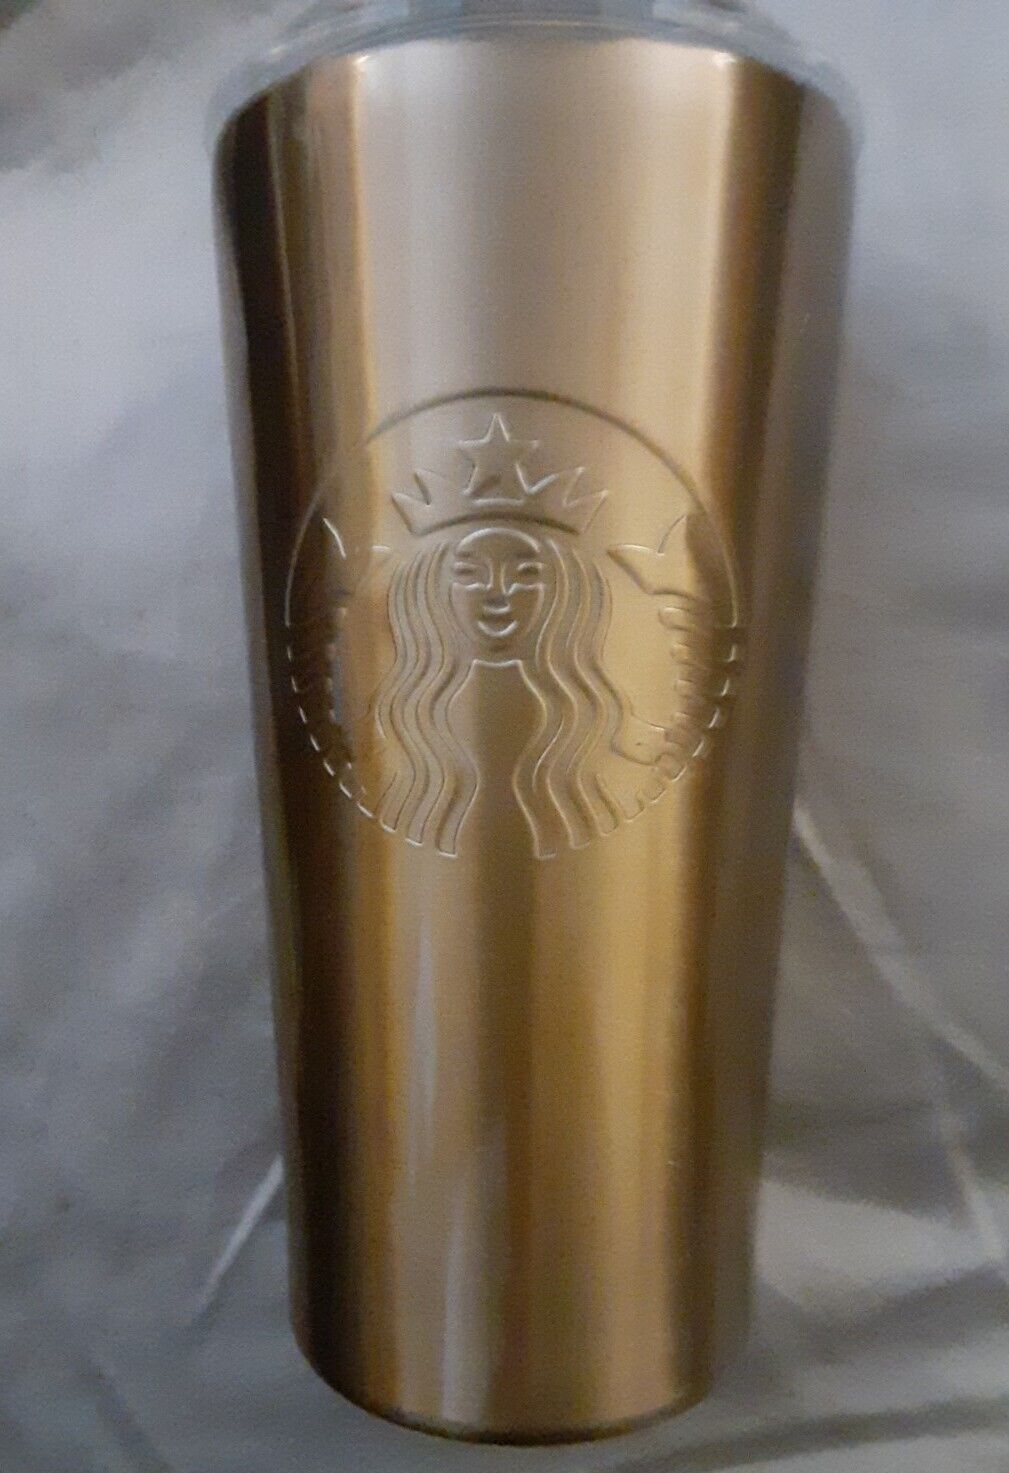 Starbucks Gold Copper Stainless Steel Cold Brew Hot Coffee Tumbler 16 Oz Grande